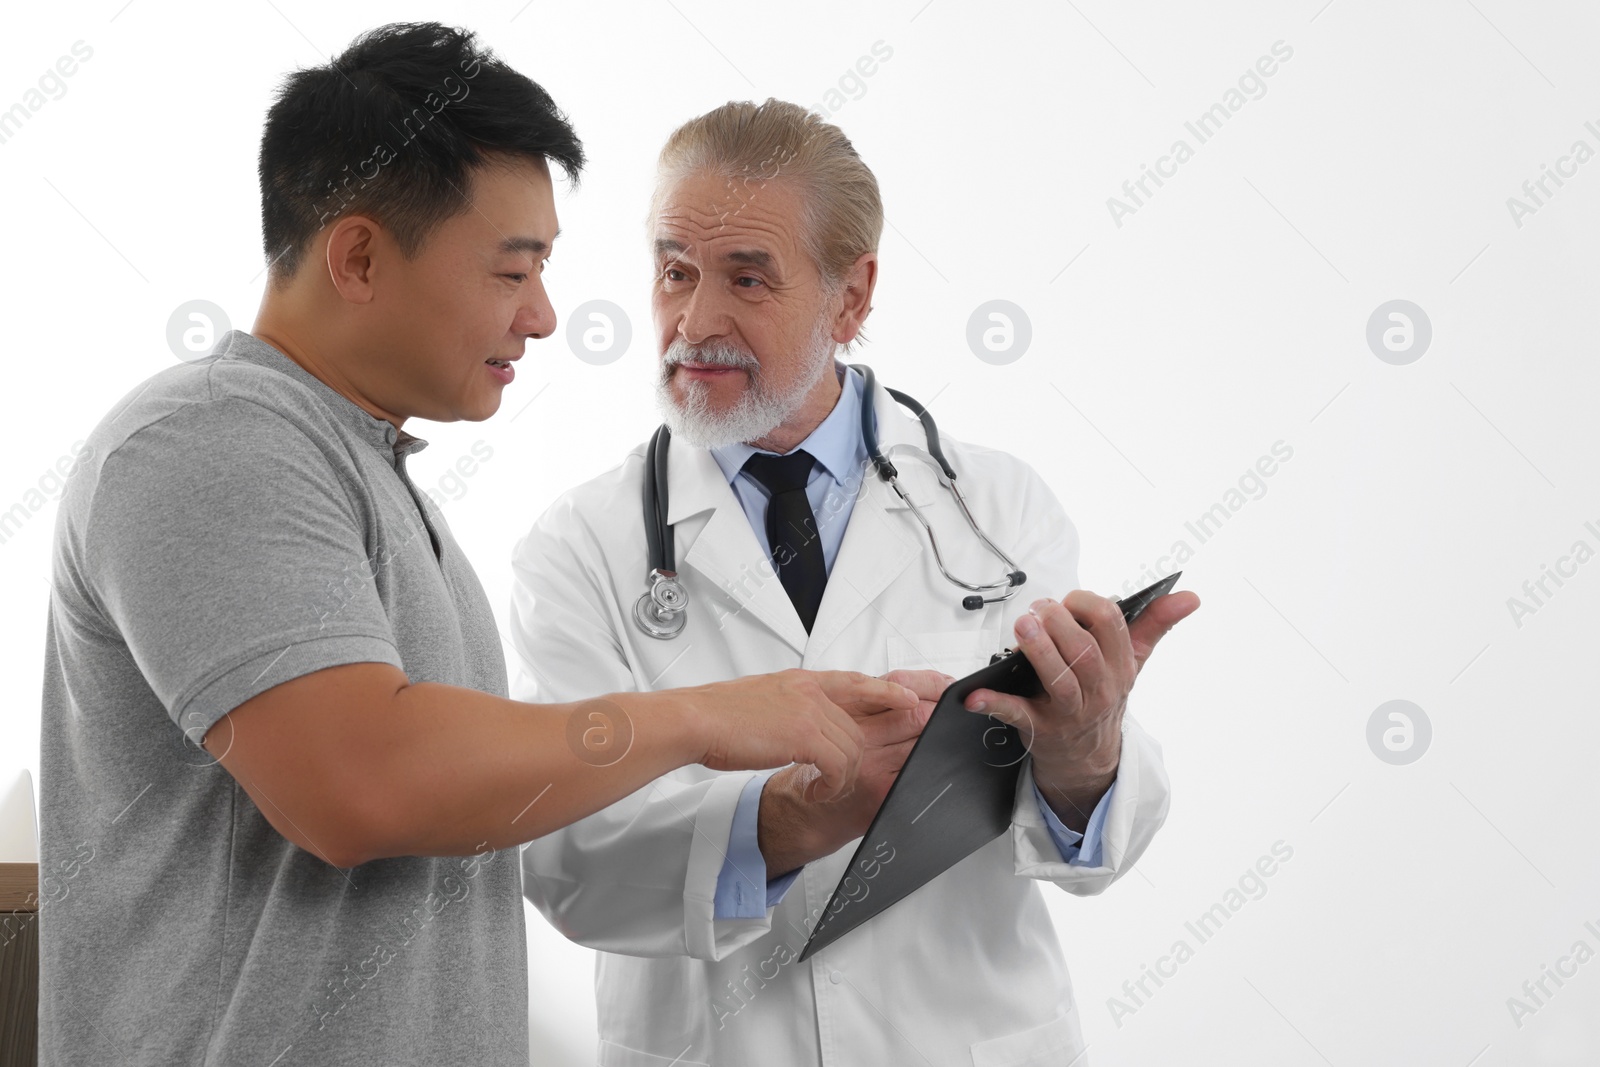 Photo of Patient having appointment with doctor on white background